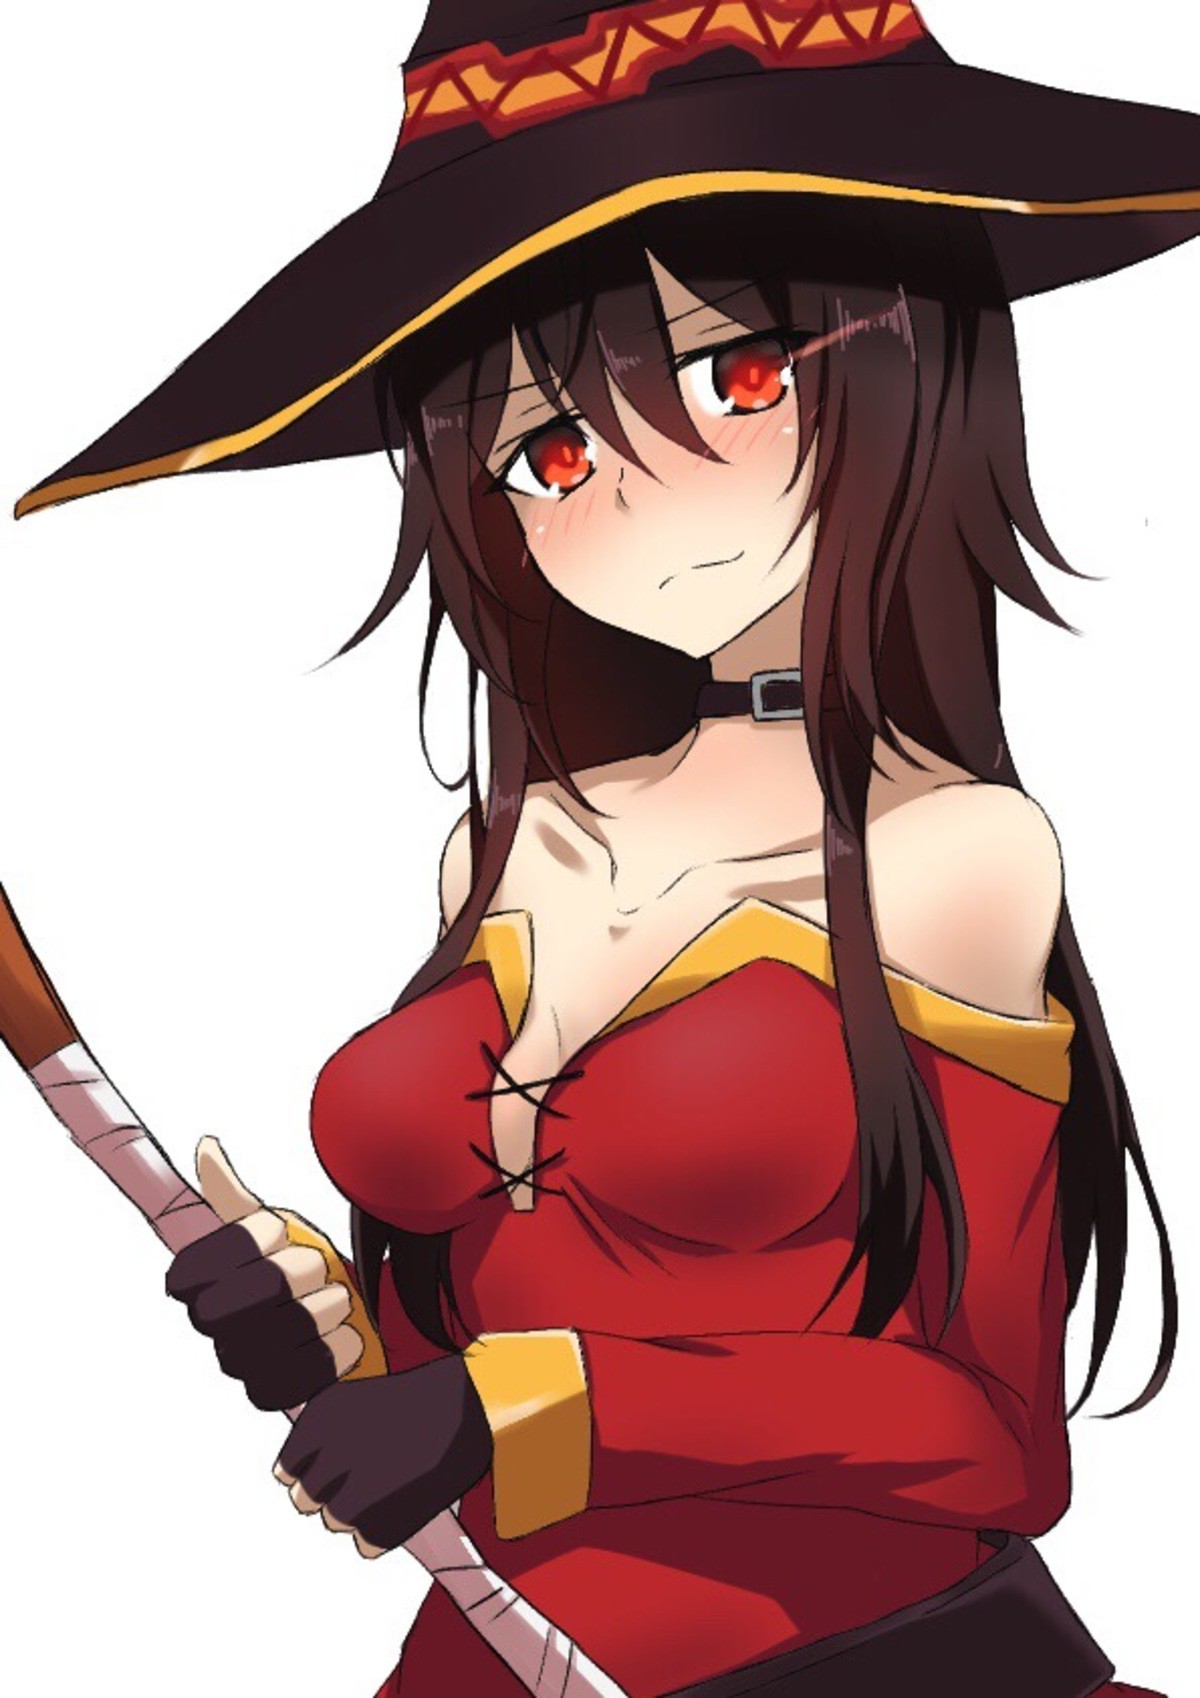 Daily Megu - 1042: Megumax. join list: DailySplosion (824 subs)Mention History Source: .. megu with tits is herresy